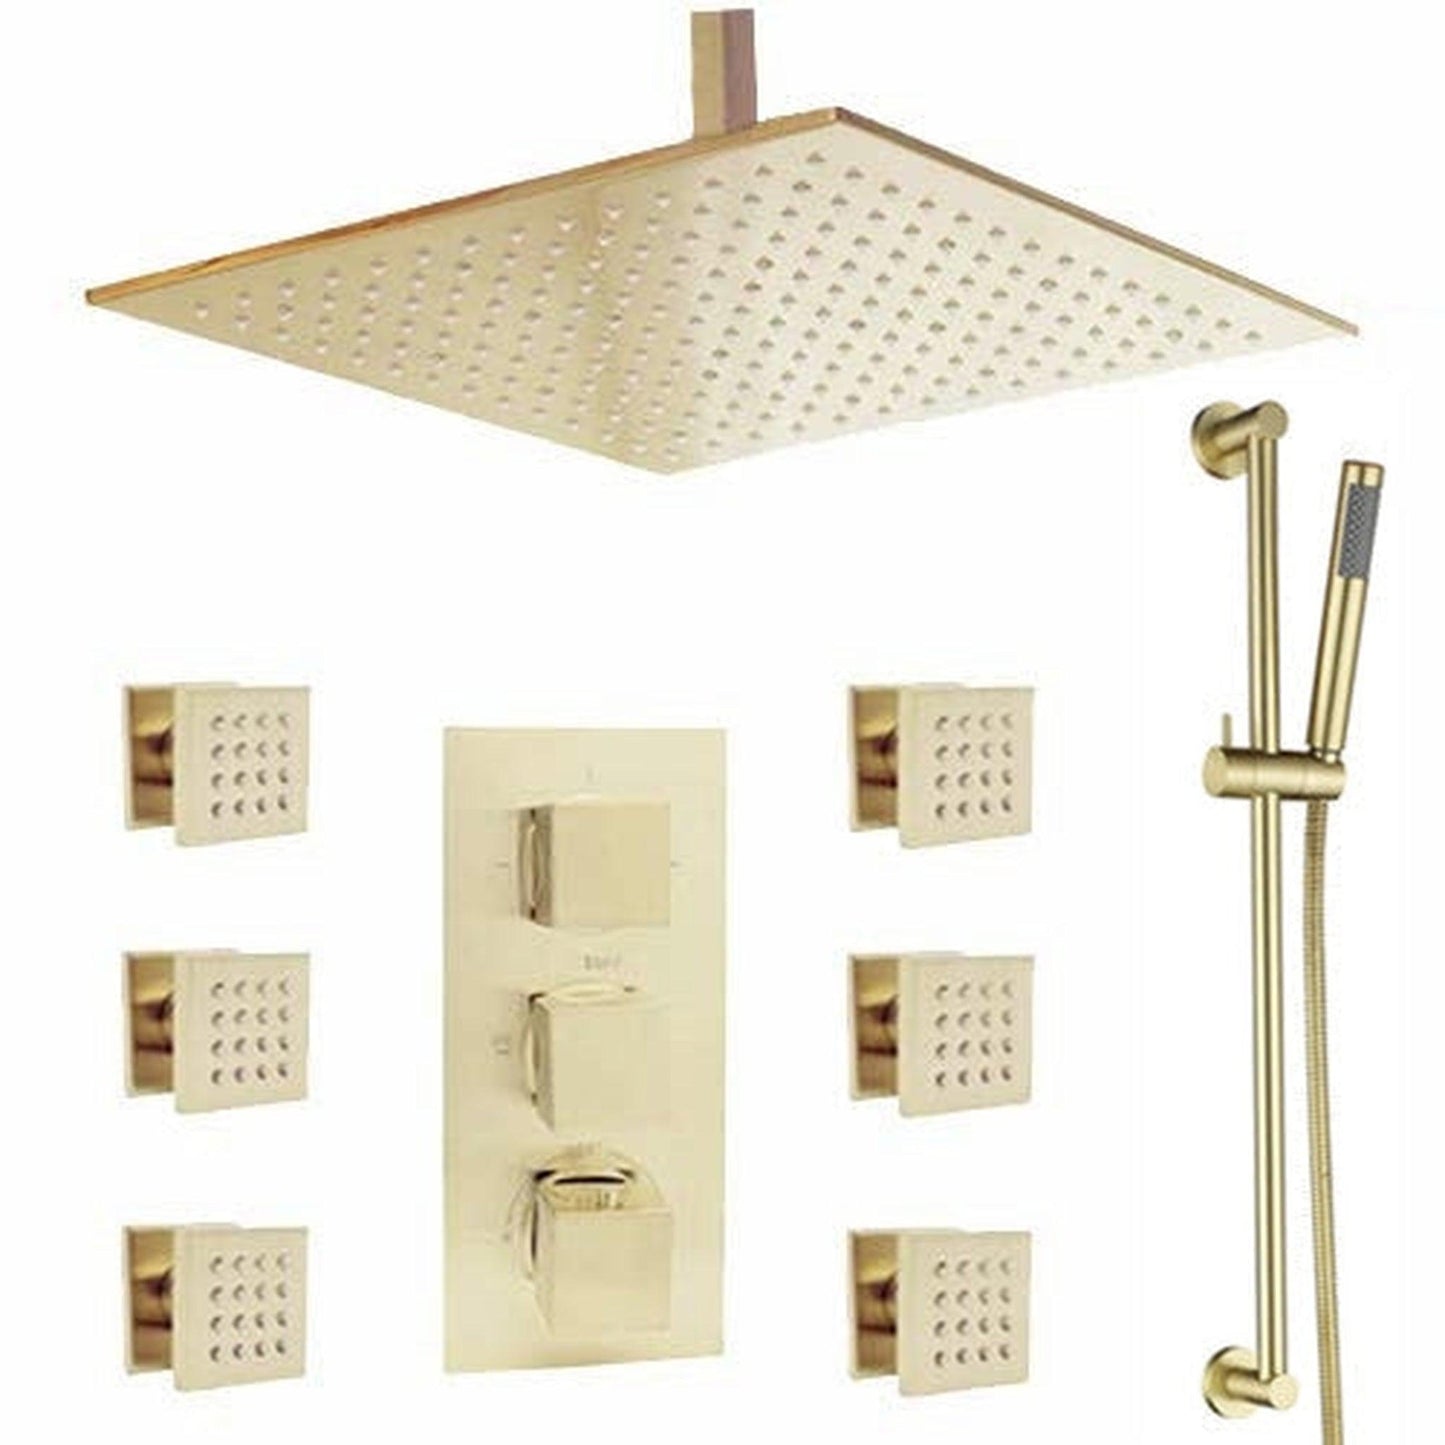 FontanaShowers Verona Creative Luxury 16" Brushed Gold Square Ceiling Mounted Thermostatic Button Mixer Rainfall Shower System With 6-Jet Body Sprays and Hand Shower